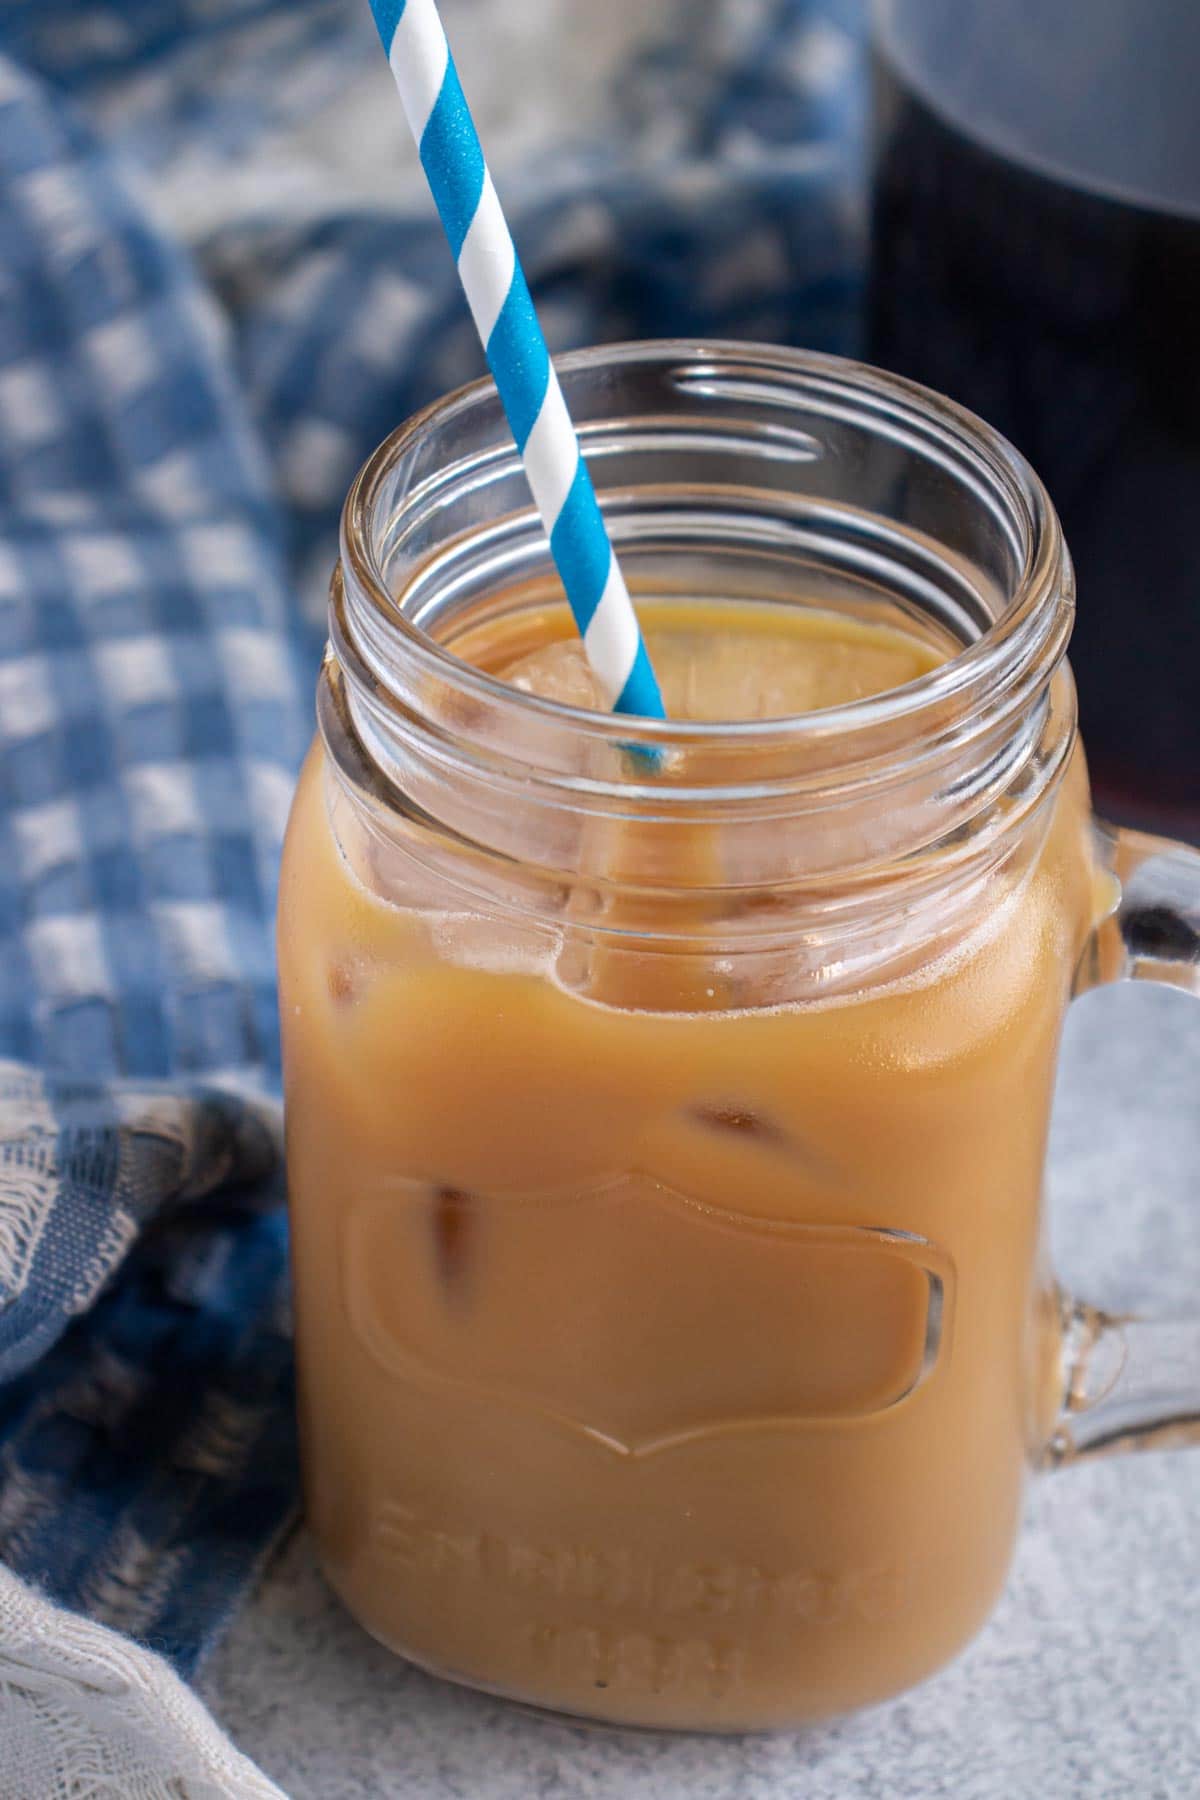 A glass mug filled with iced coffee next to a blue and white checkered towel.